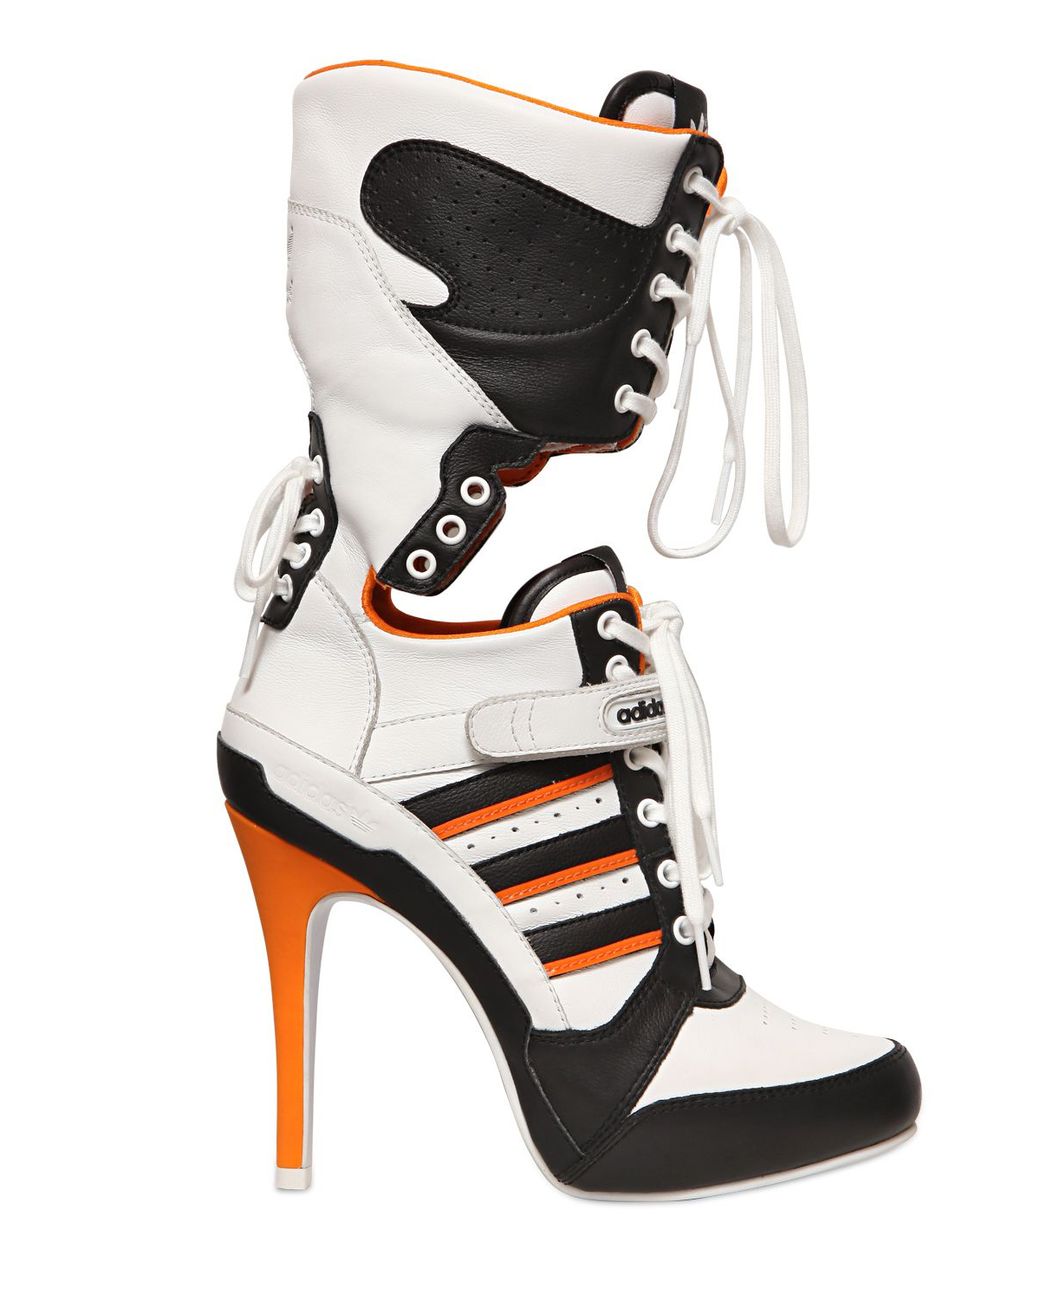 Parameters Competitive past Jeremy Scott for adidas 130mm Js High Heel Leather Boots in Orange | Lyst UK